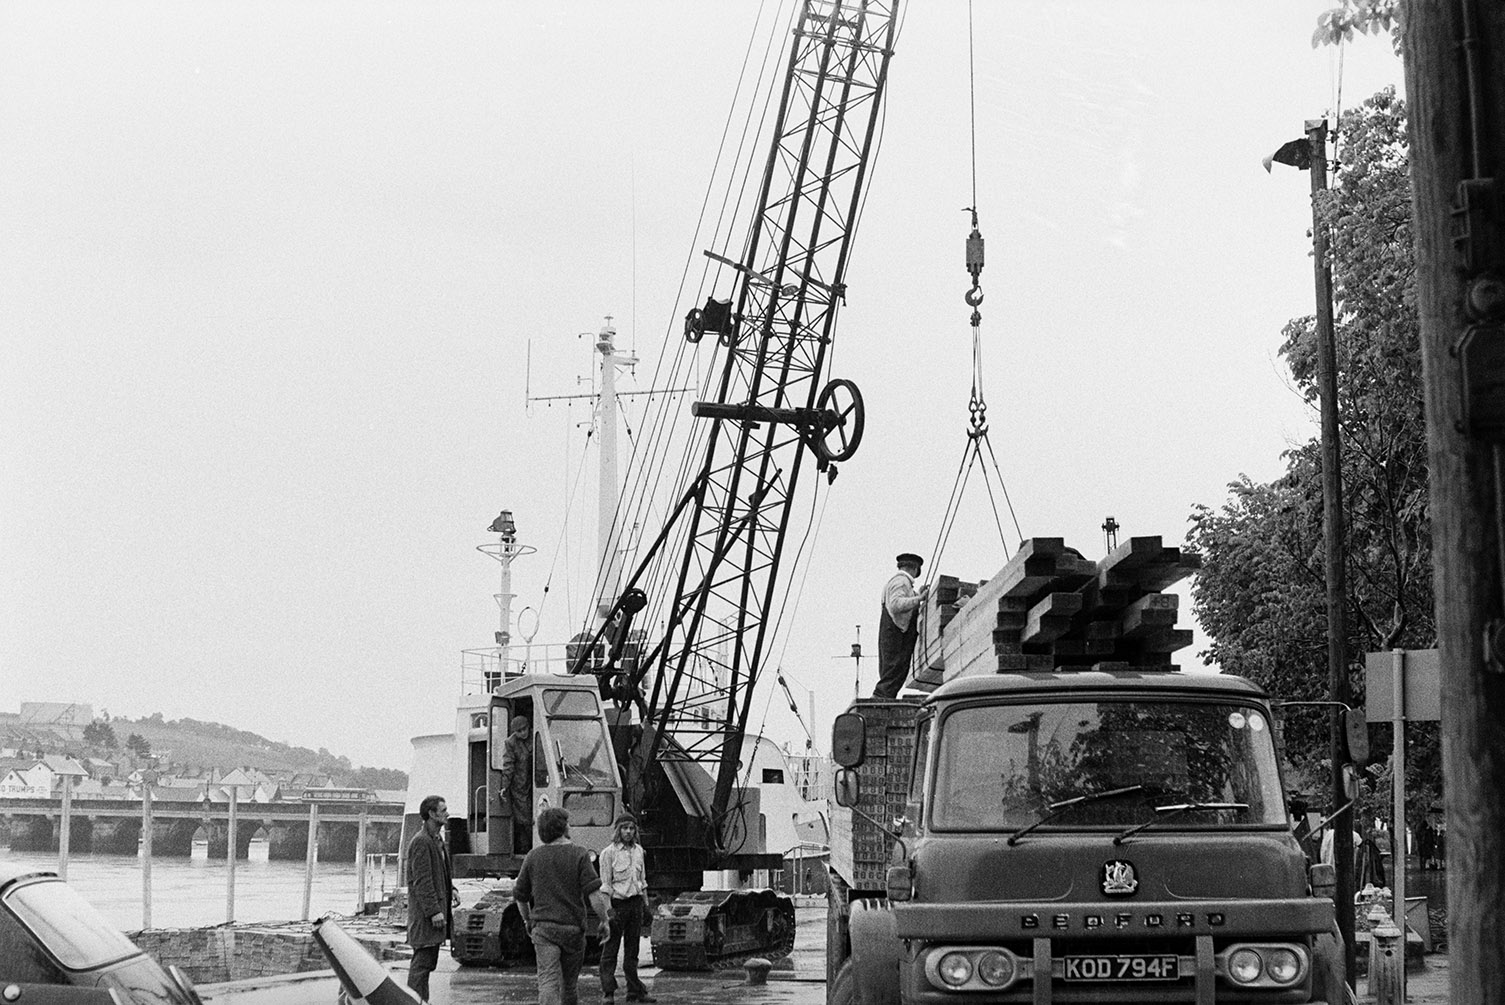 A crane loading planks of wood, taken from the ship 'Lone Bres' onto a lorry at Bideford Quay. Bideford Long Bridge, also known as Bideford Old Bridge can be seen in the background.